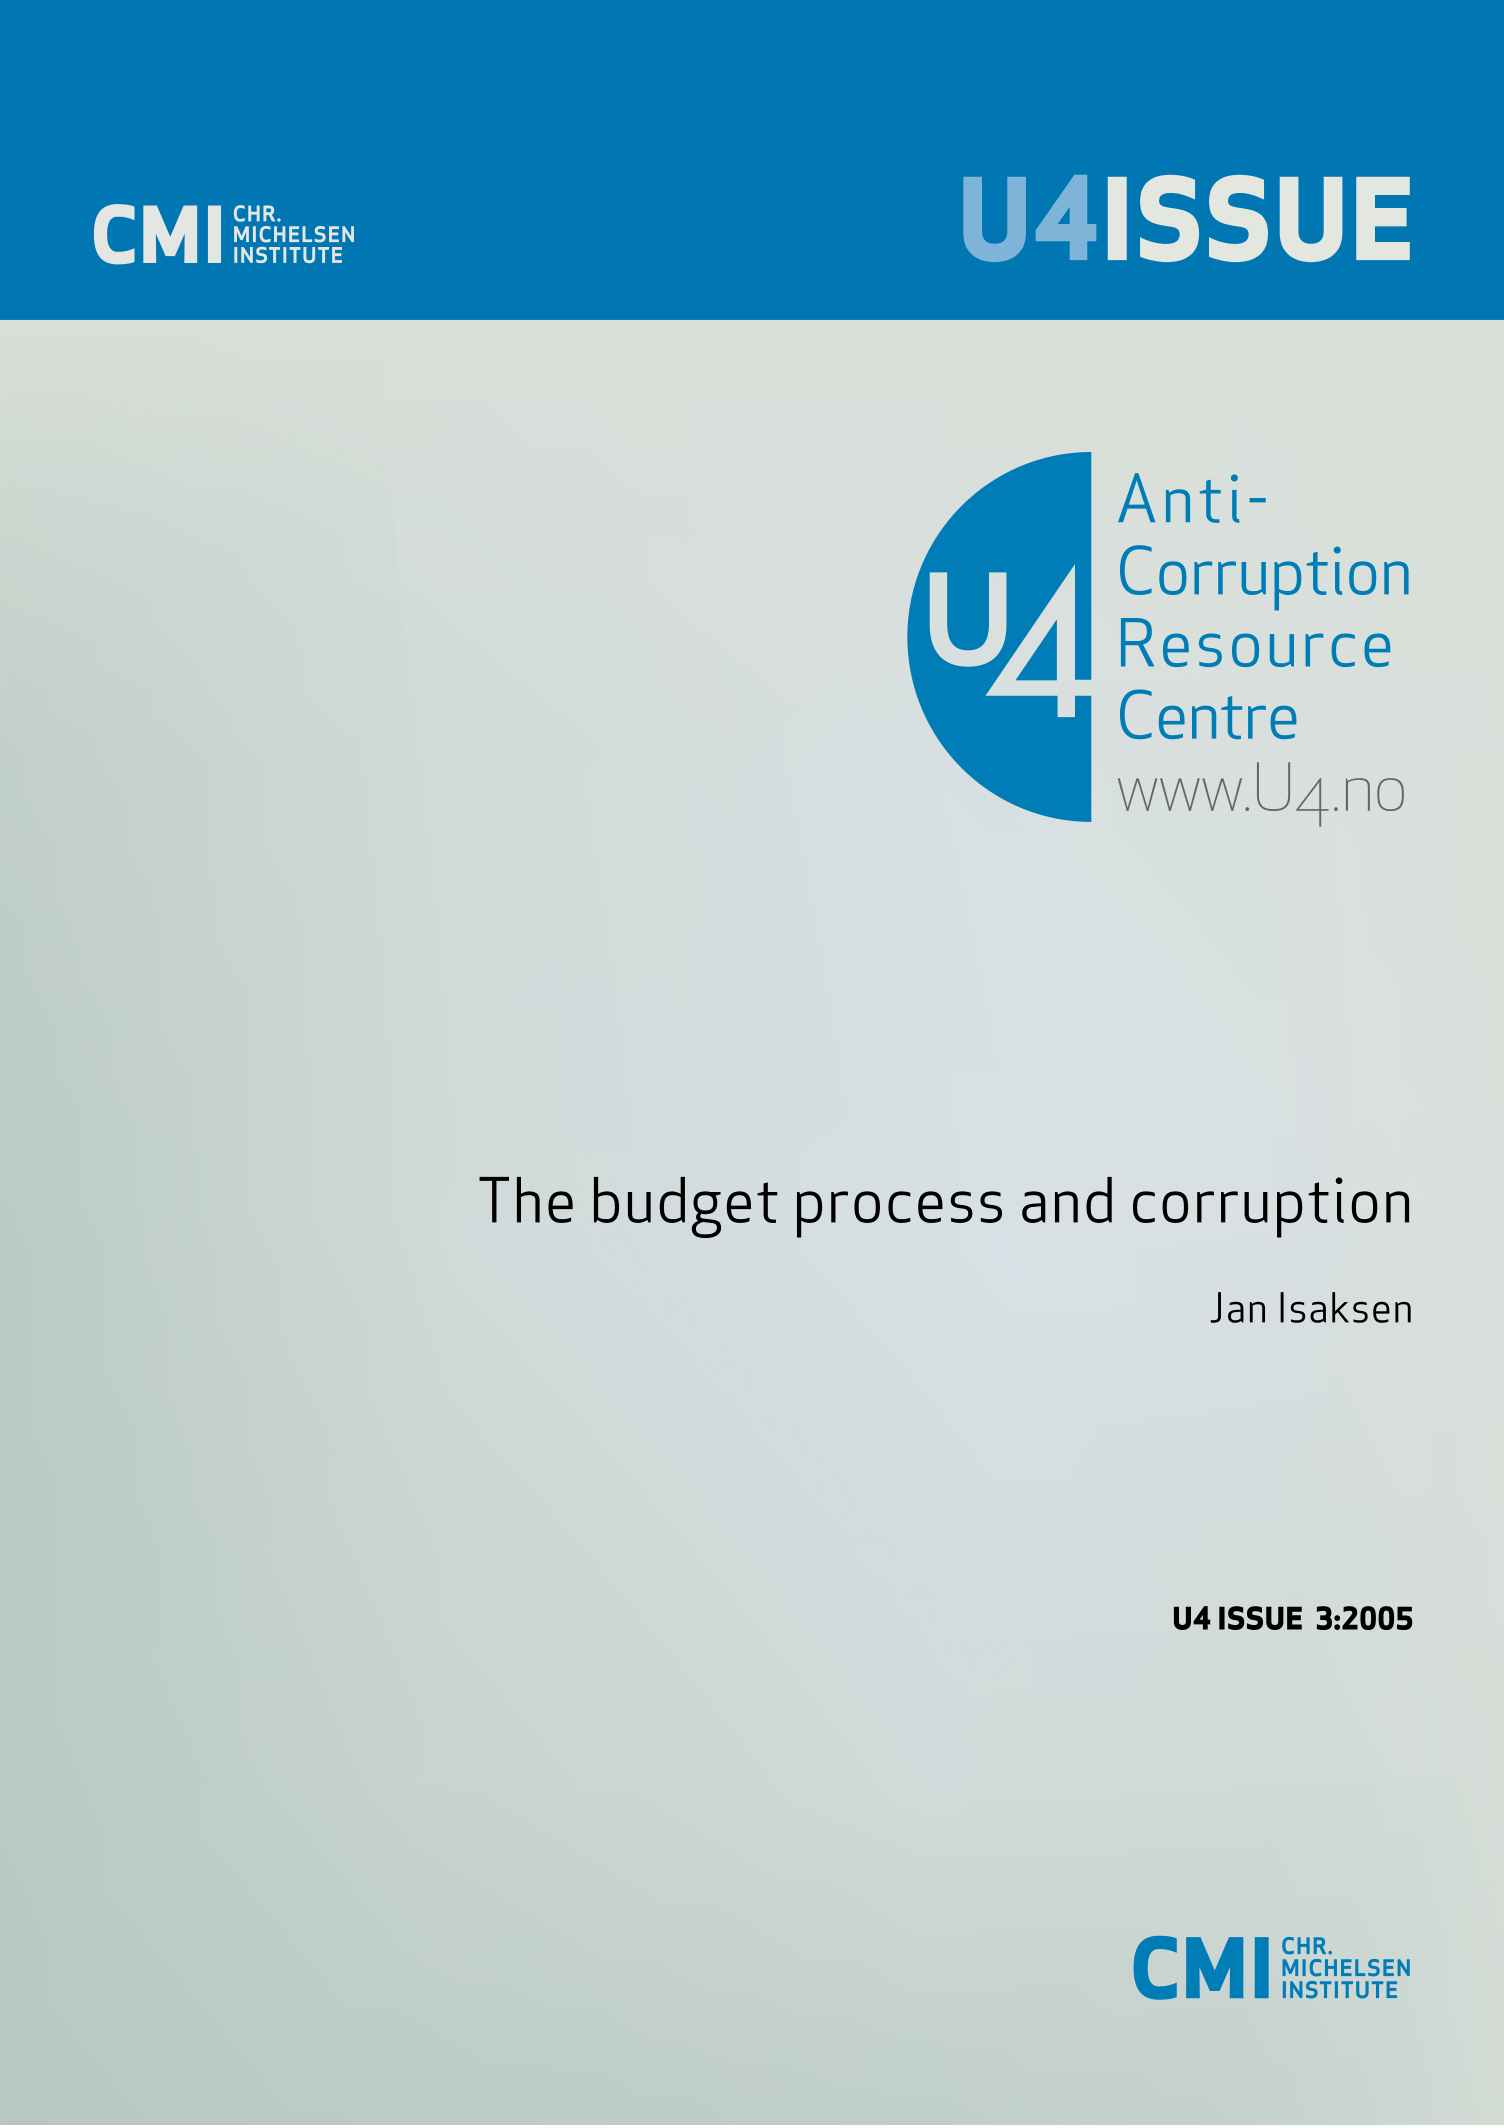 The budget process and corruption